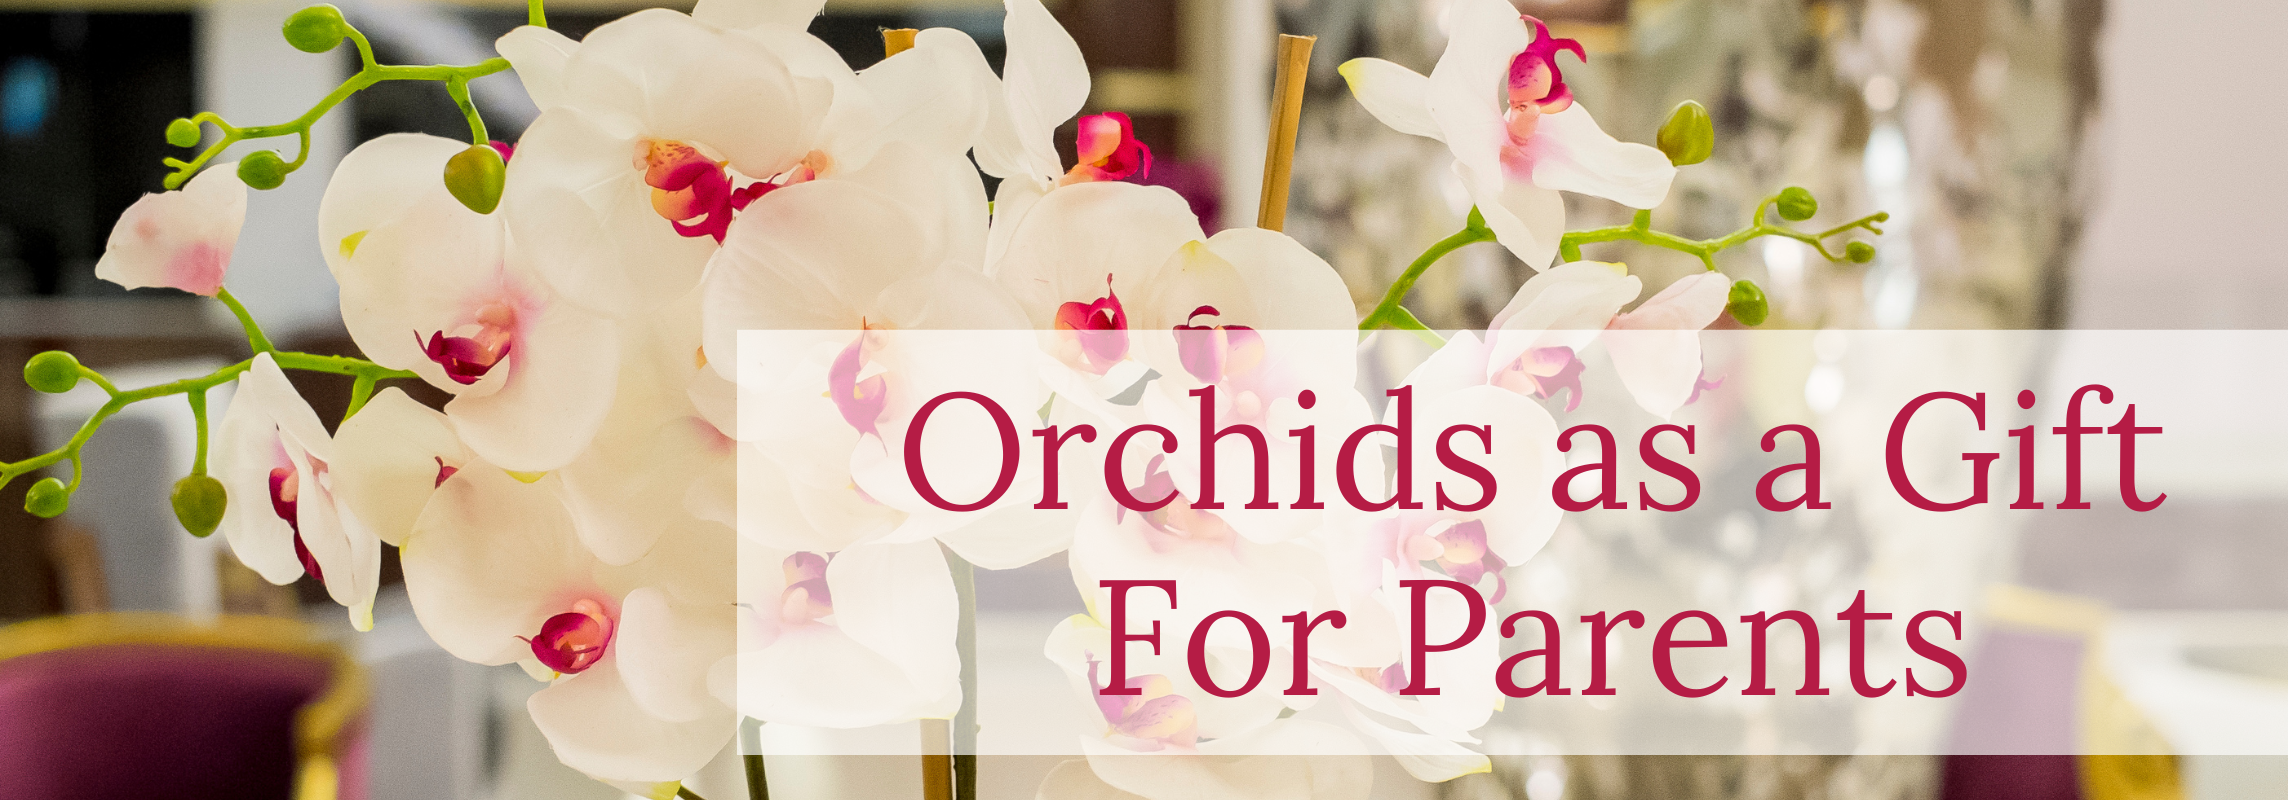 orchids gift for parents